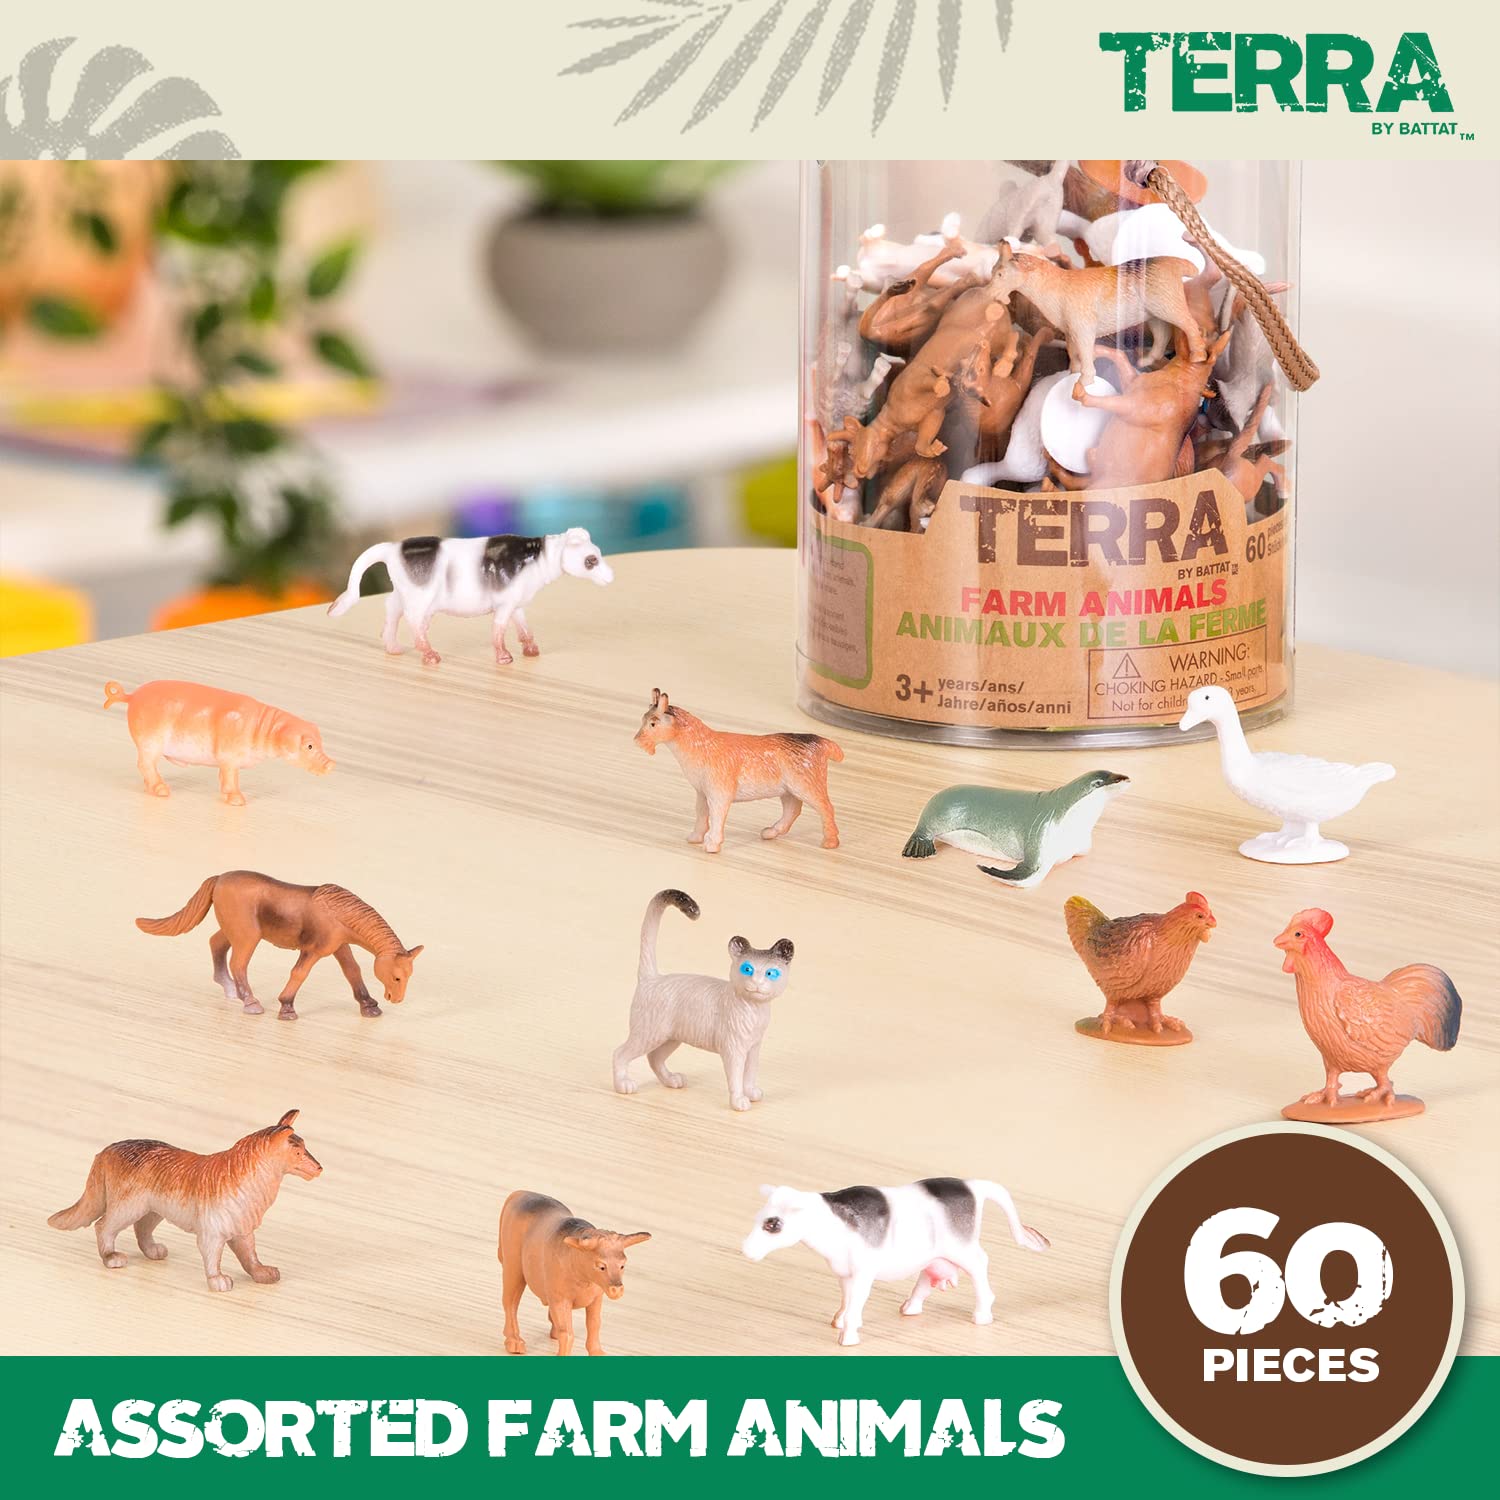 Terra by Battat Assorted Farm Animals Toys – Educational Toys for 3+ Year Old Kids - Collectible Farm Animal Figurines (60 Pieces)